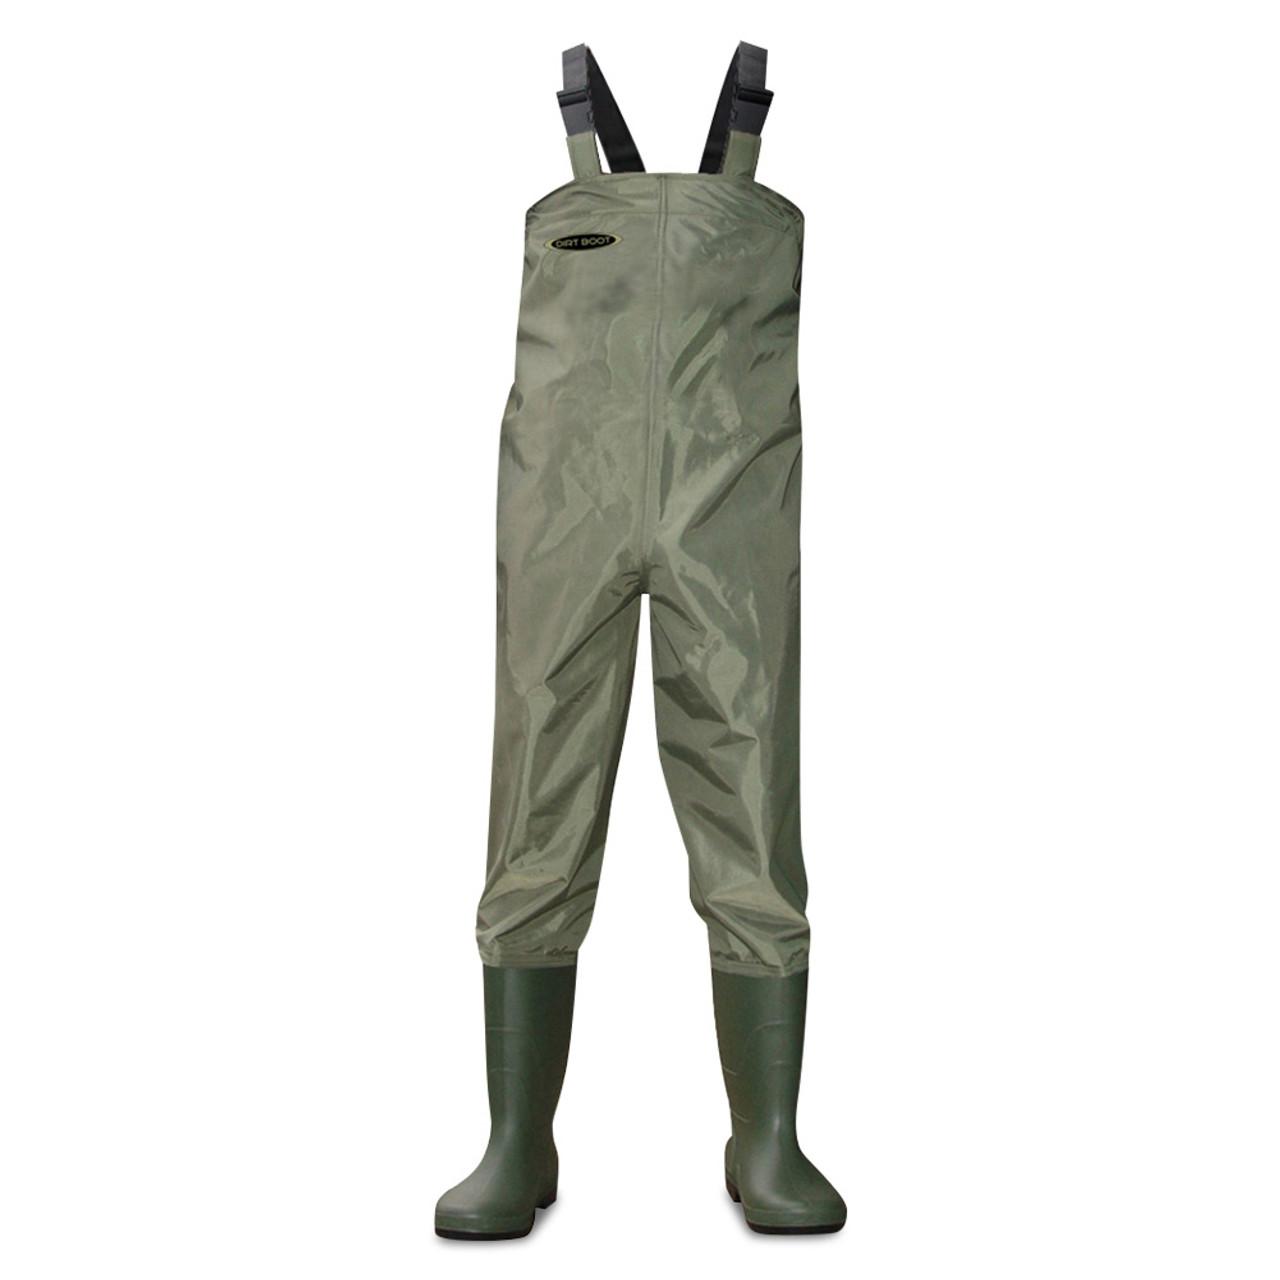 Waterproof Boots For Men Waders Pants For Fly Fishing Hunting Wader